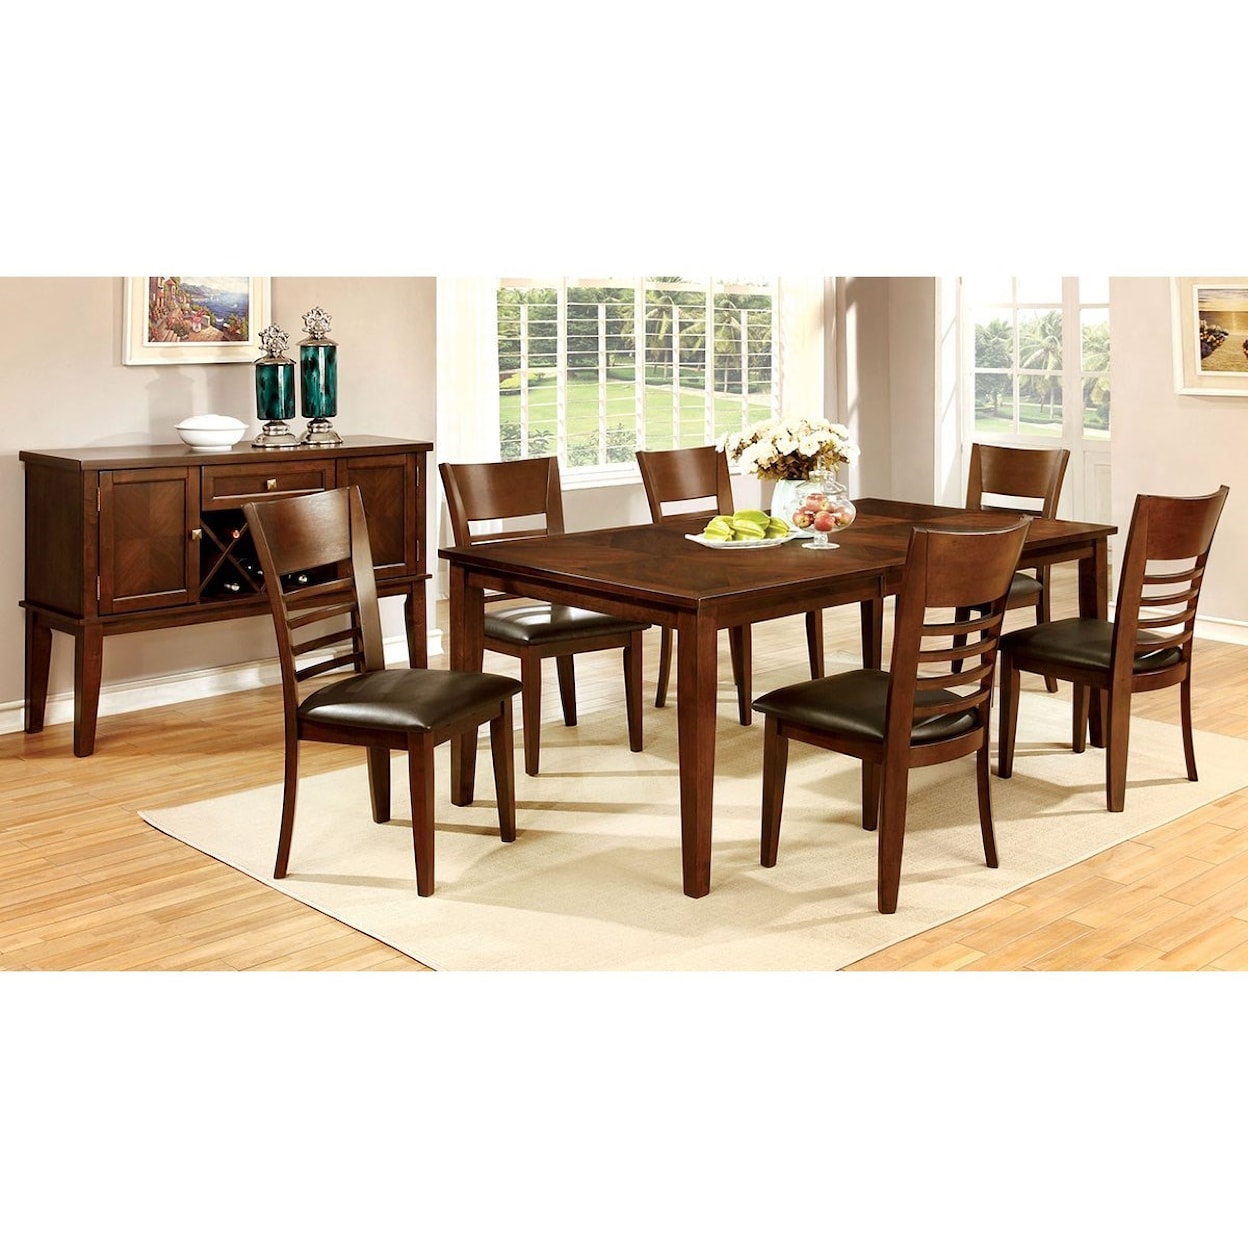 Furniture of America Hillsview Dining Table and Chair Set 